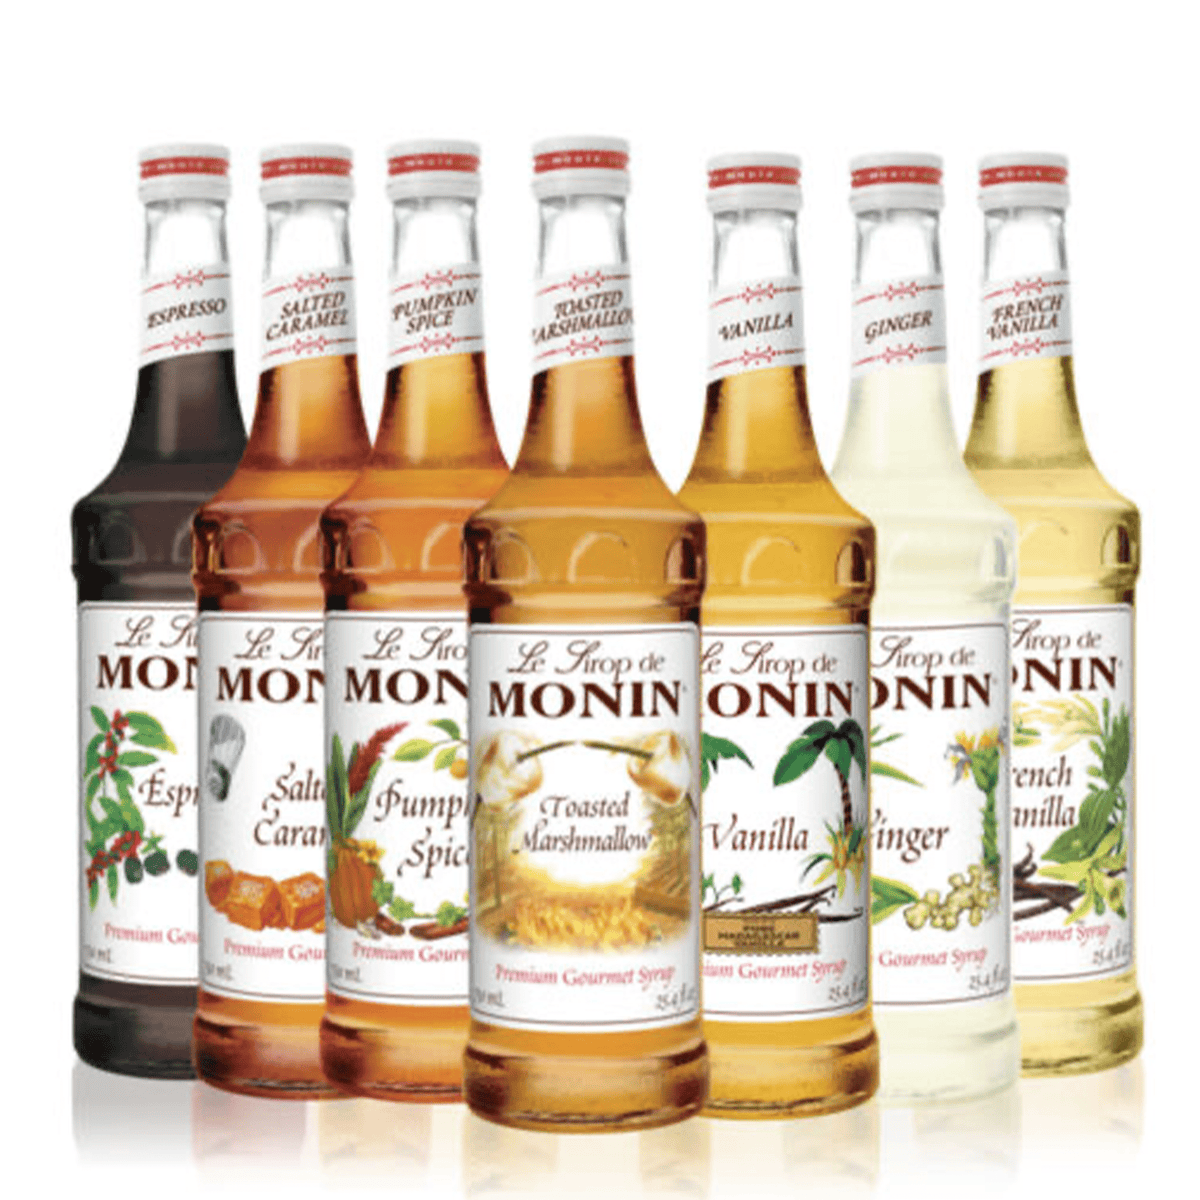 Monin Syrup - Build Your Own Case of 12 - Wholesale Price